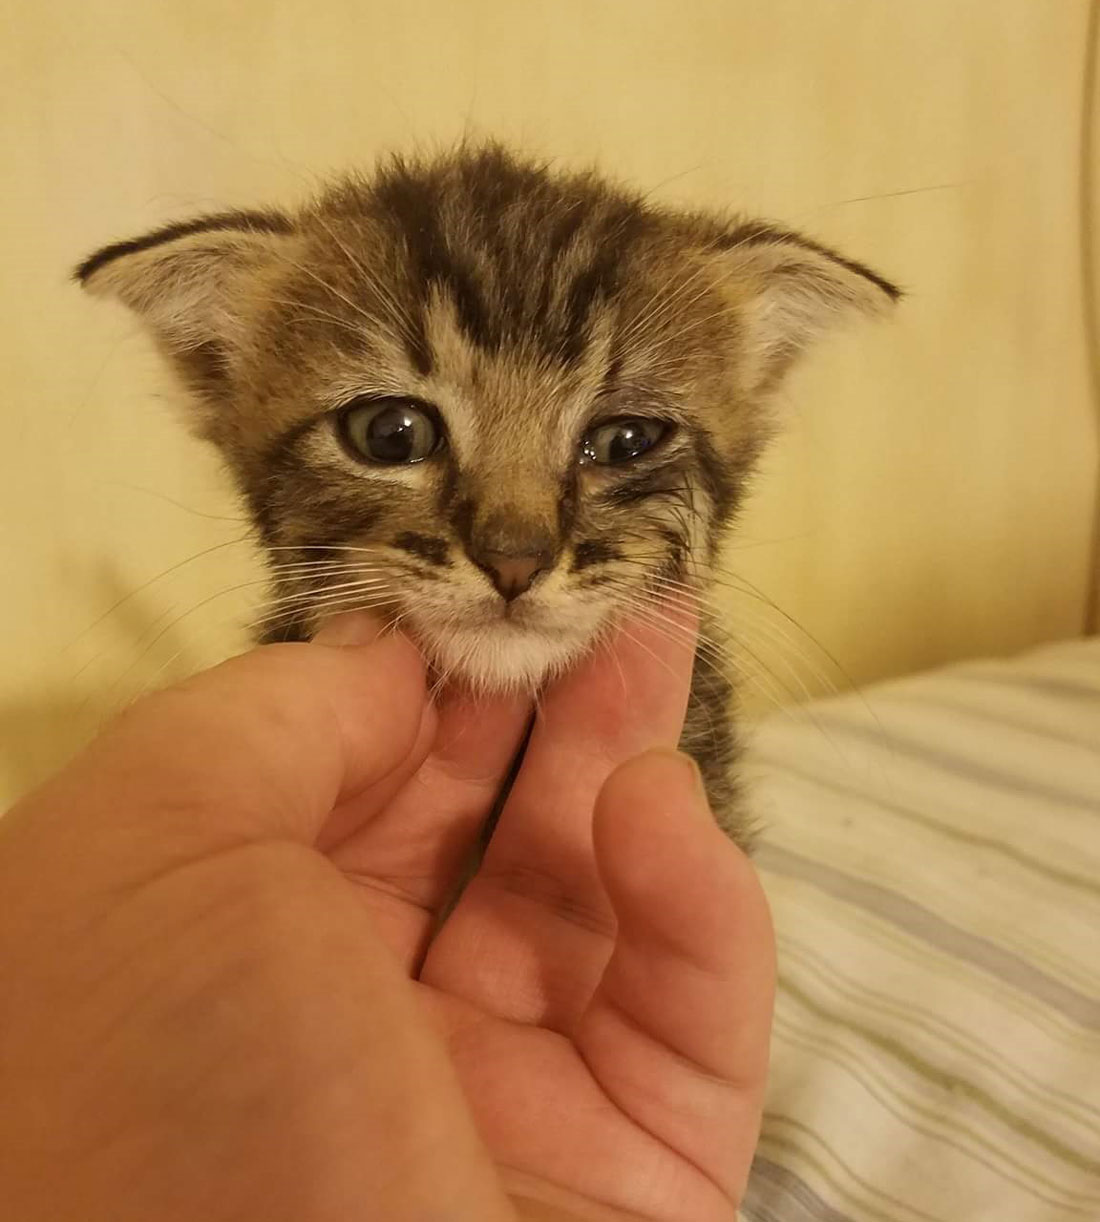 Foster kitten with cartilage issues. His name is Dobby